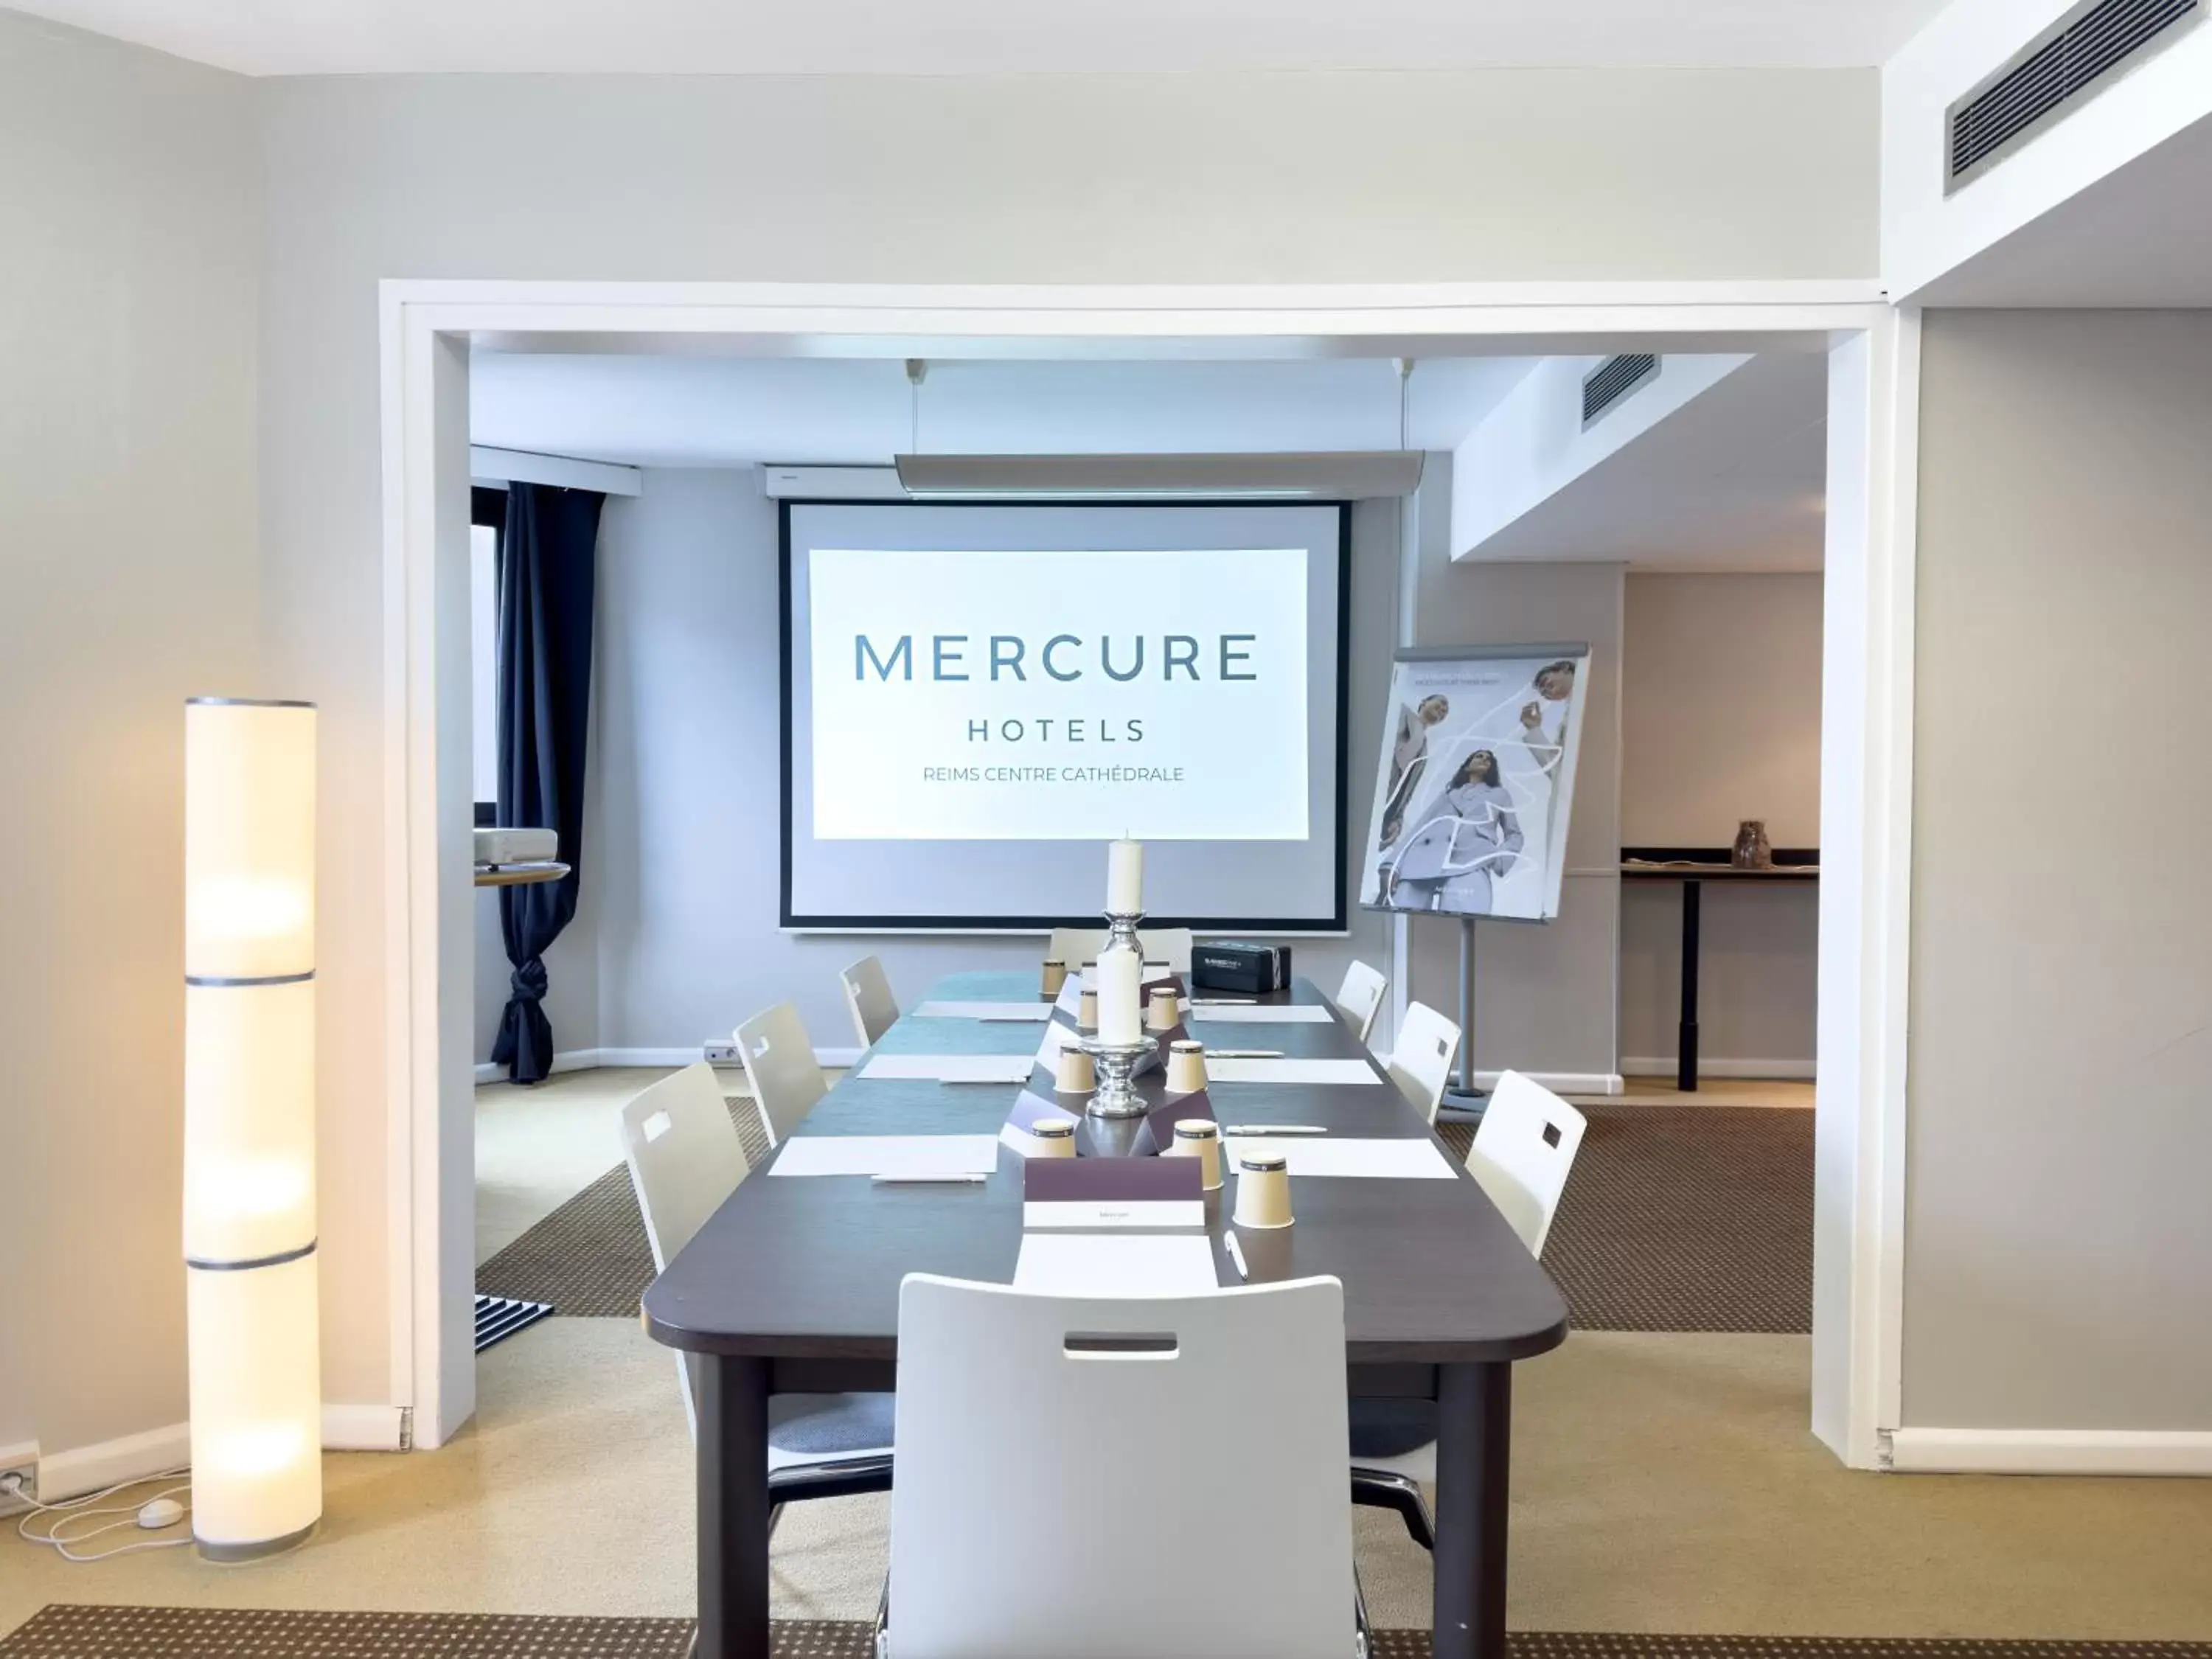 Meeting/conference room in Mercure Reims Centre Cathédrale